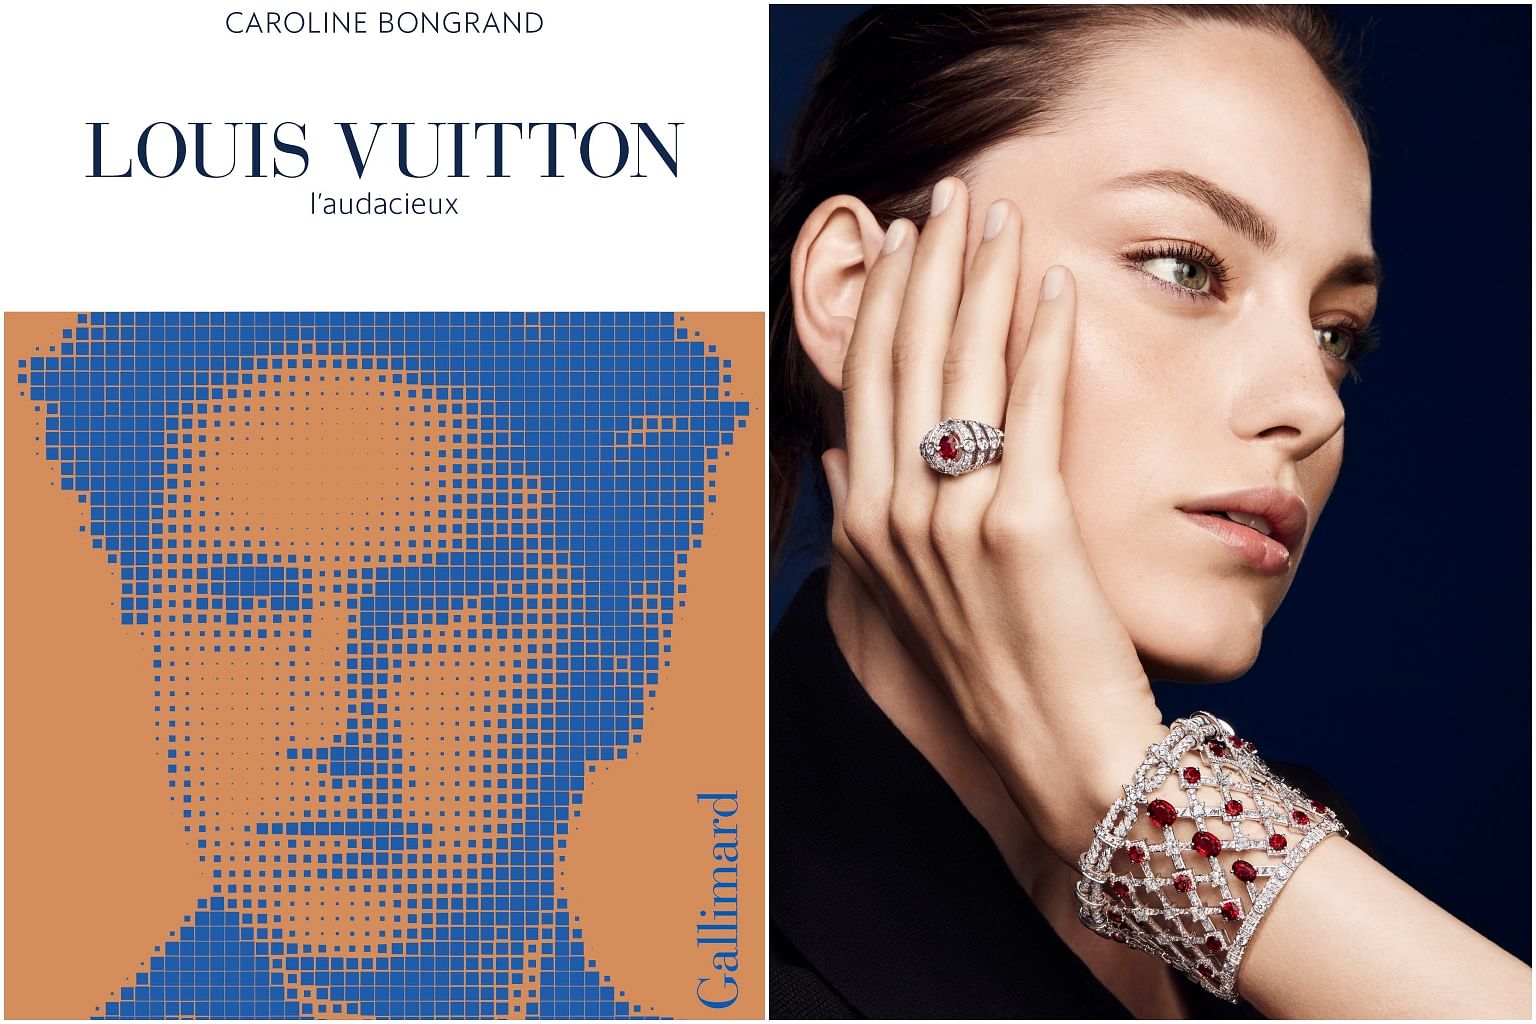 Vuitton publishes Louis Vuitton: L'Audacieux, on the life of its founder